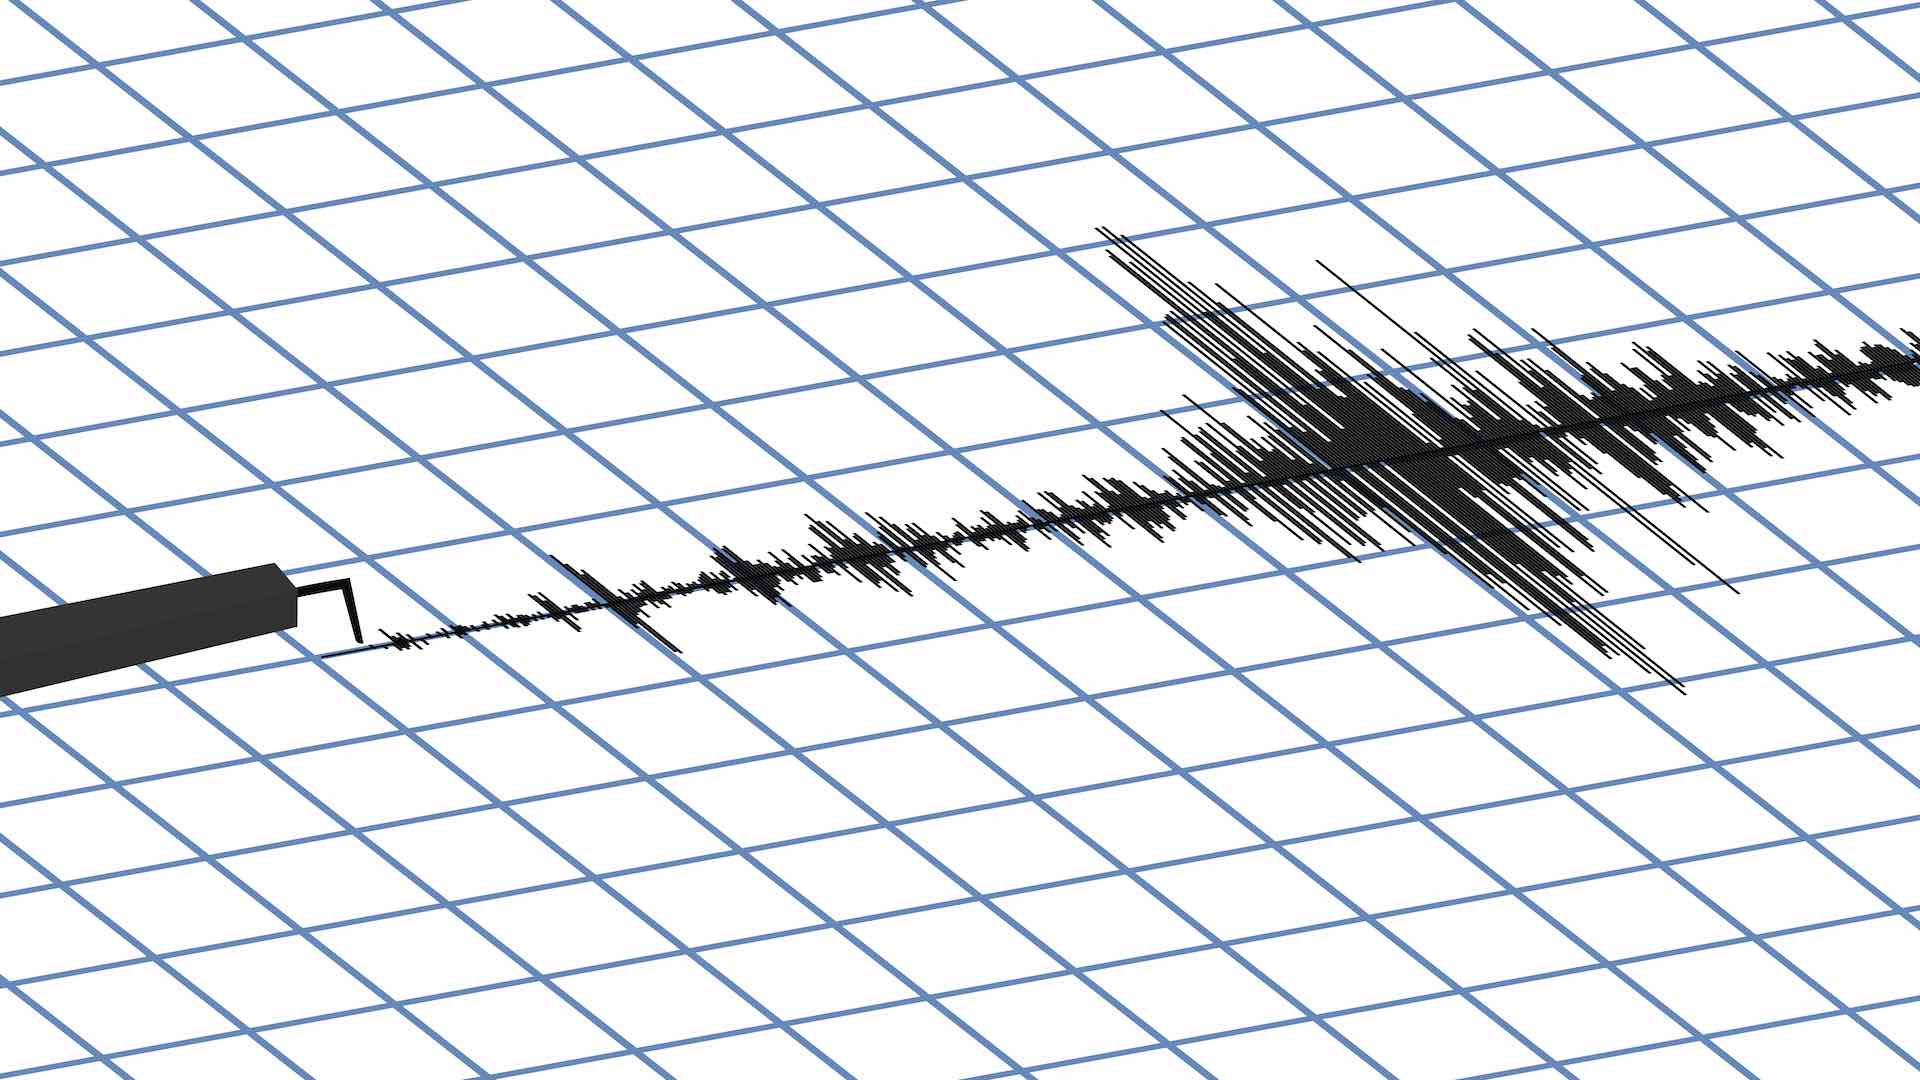 New Zealand's South Island jolted by significant 6.0 earthquake